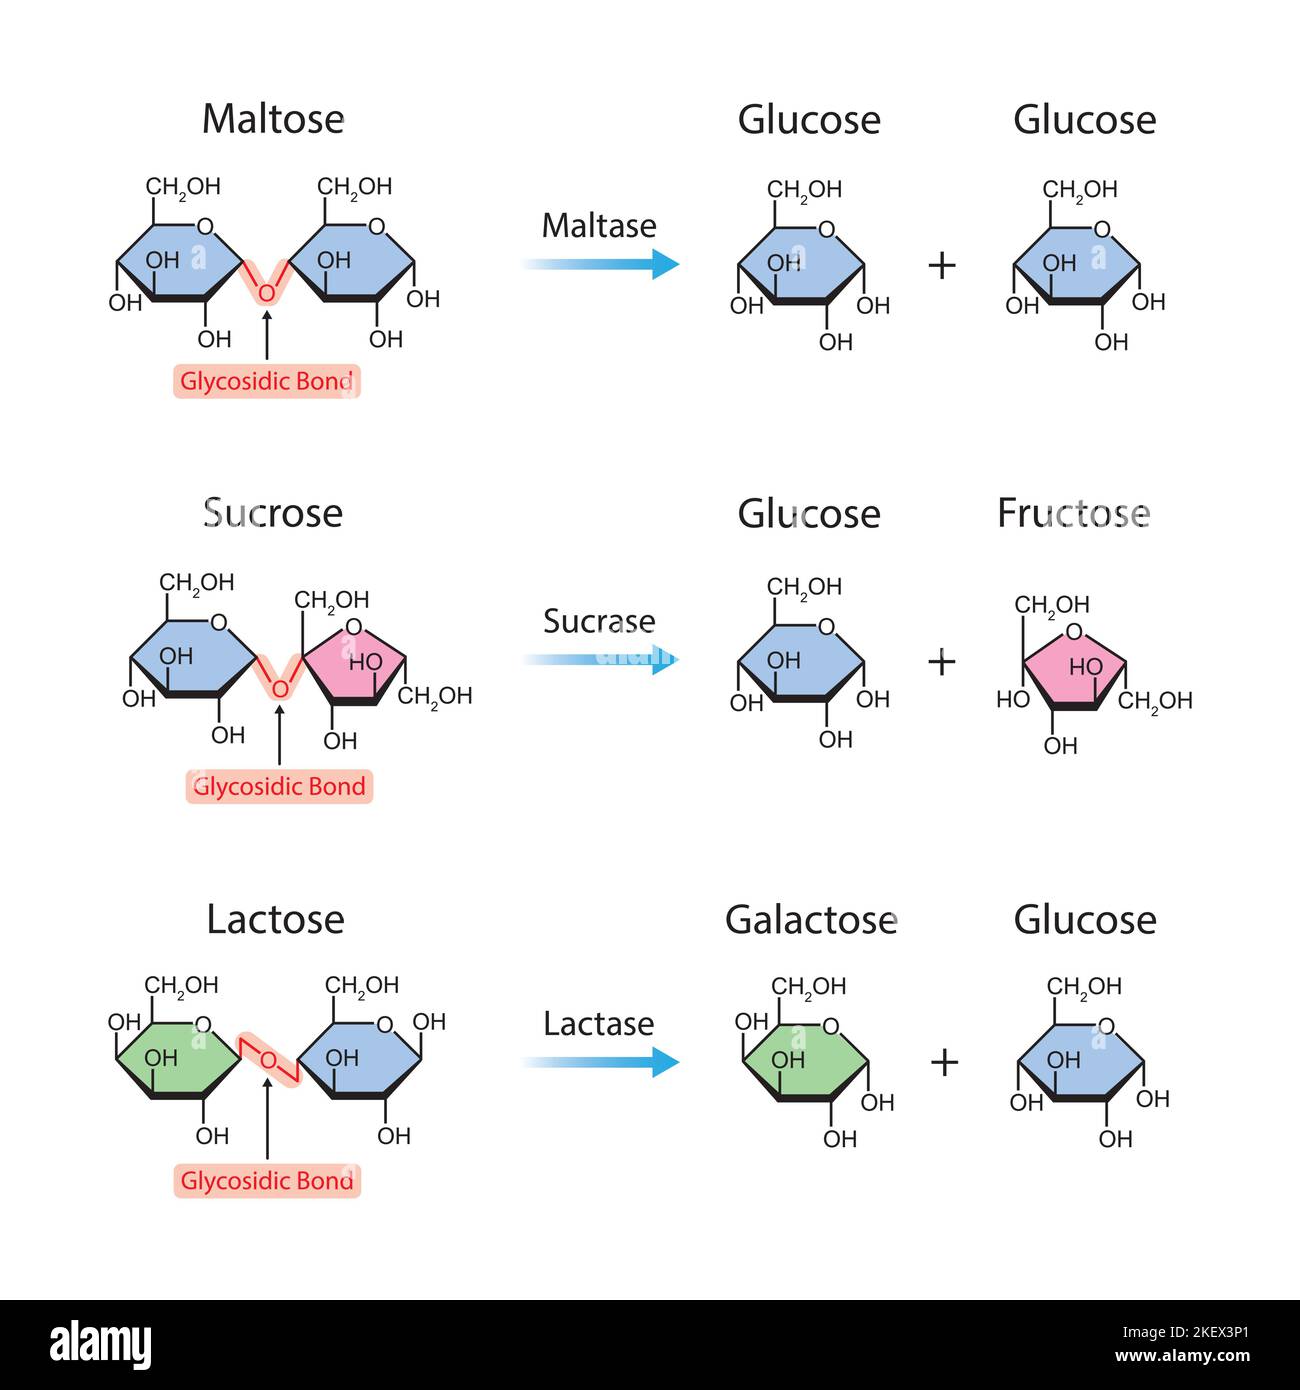 Scientific Designing of Disaccharides Digestion. Maltase, Sucrase and Lactase Enzymes Effect on Disaccharides Molecules. Colorful Symbols. Vector Illu Stock Vector